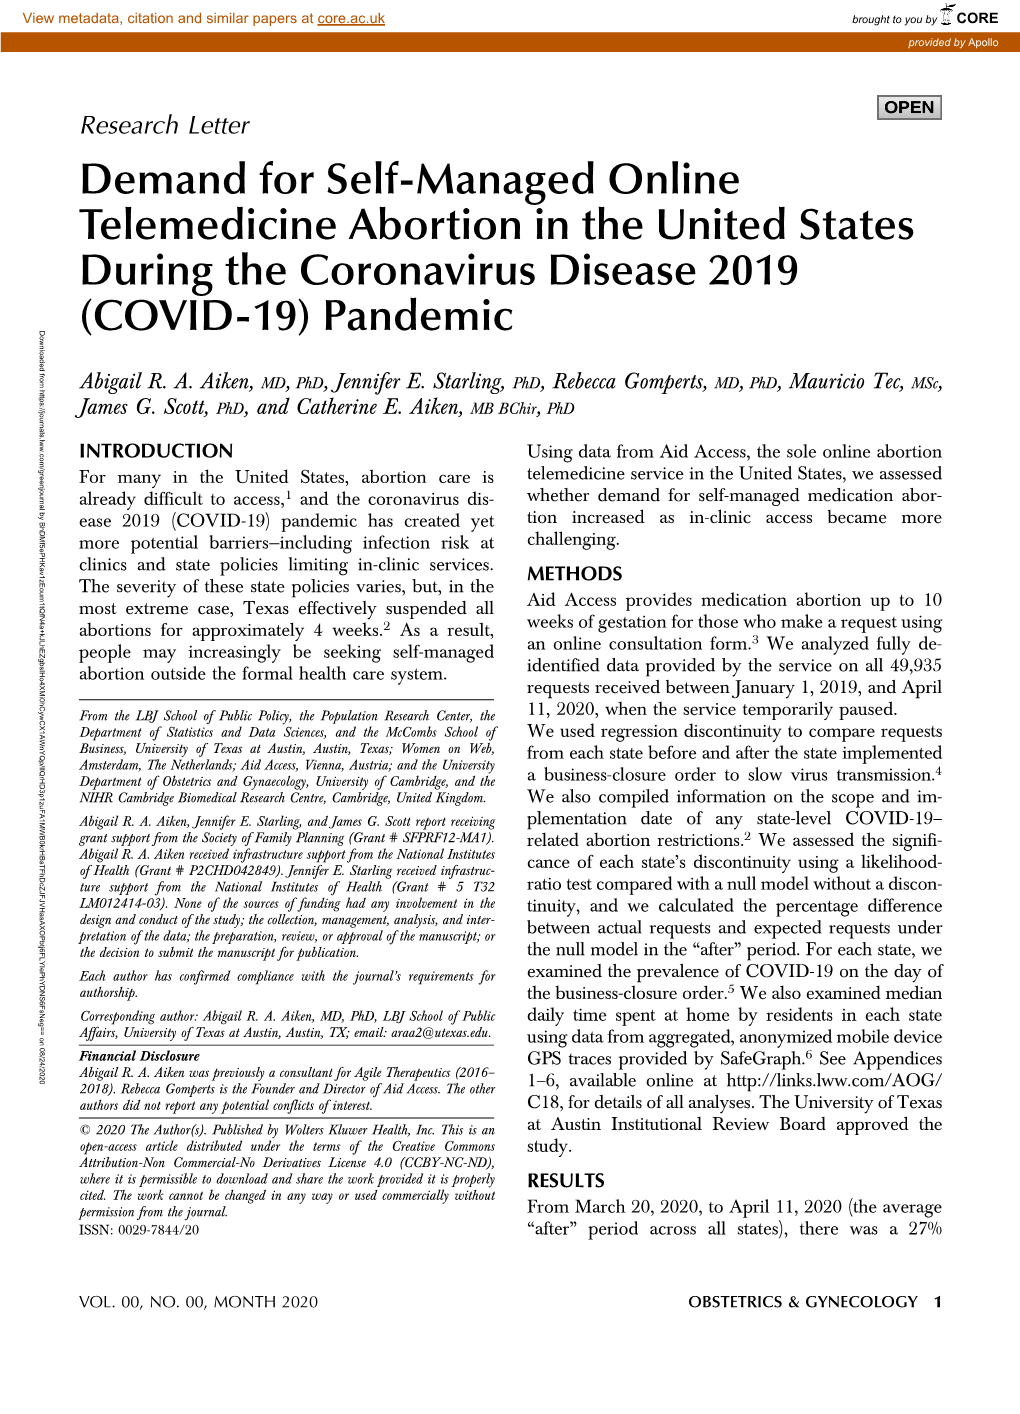 Demand for Self-Managed Online Telemedicine Abortion in the United